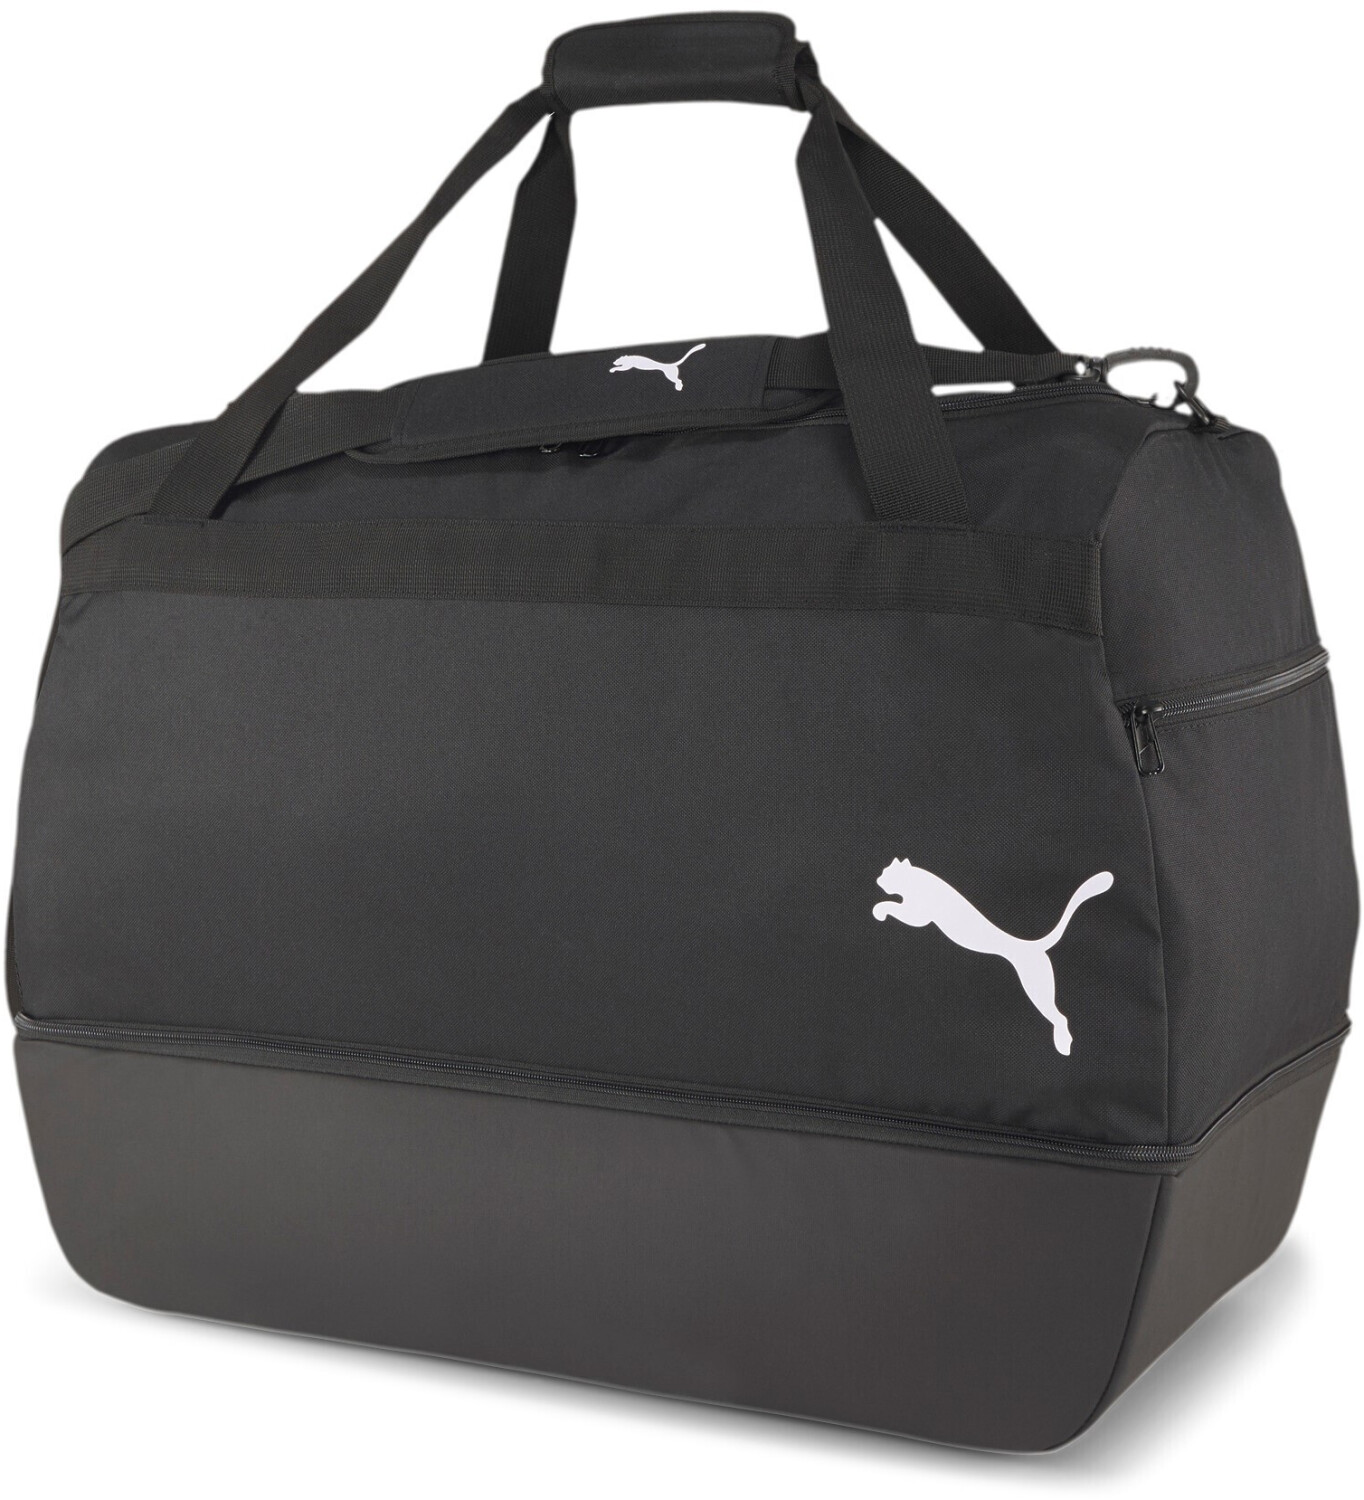 Buy Puma teamGOAL 23 Teambag M BC (076861-03) black from £28.00 (Today ...